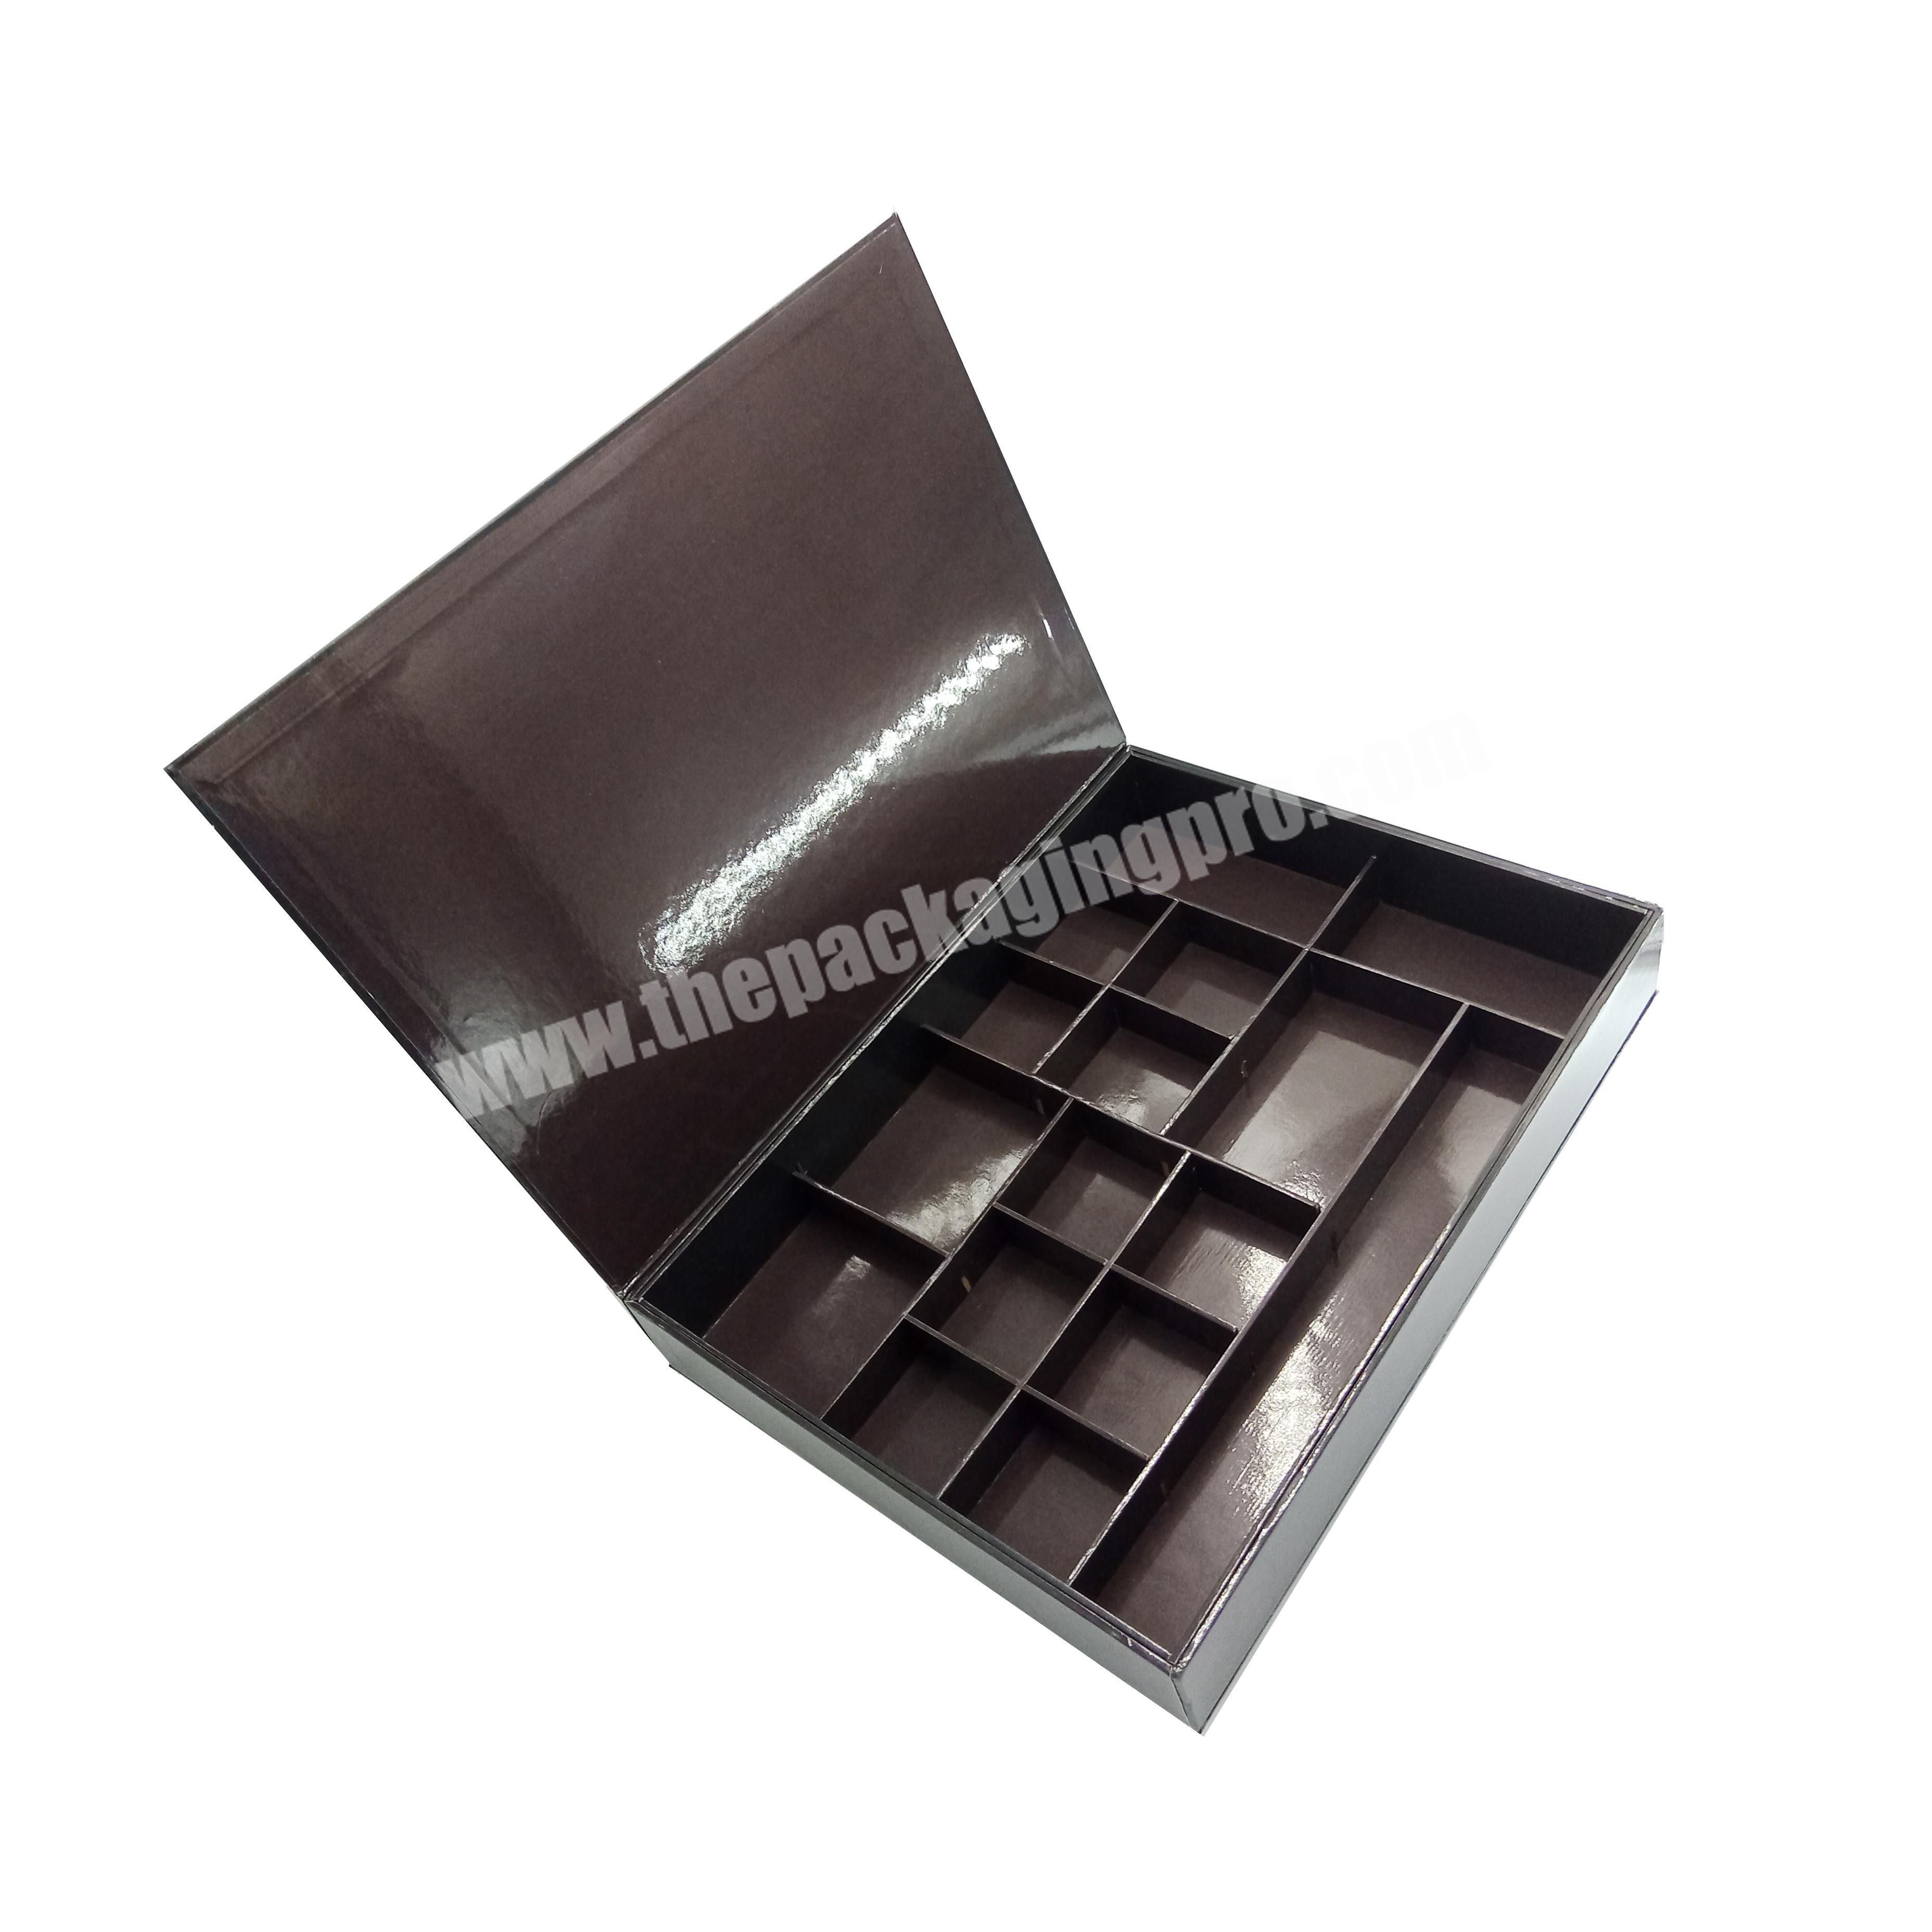 Lunch box disposable hot sales cheap new design high quality chocolate sale OEM packaging boxes